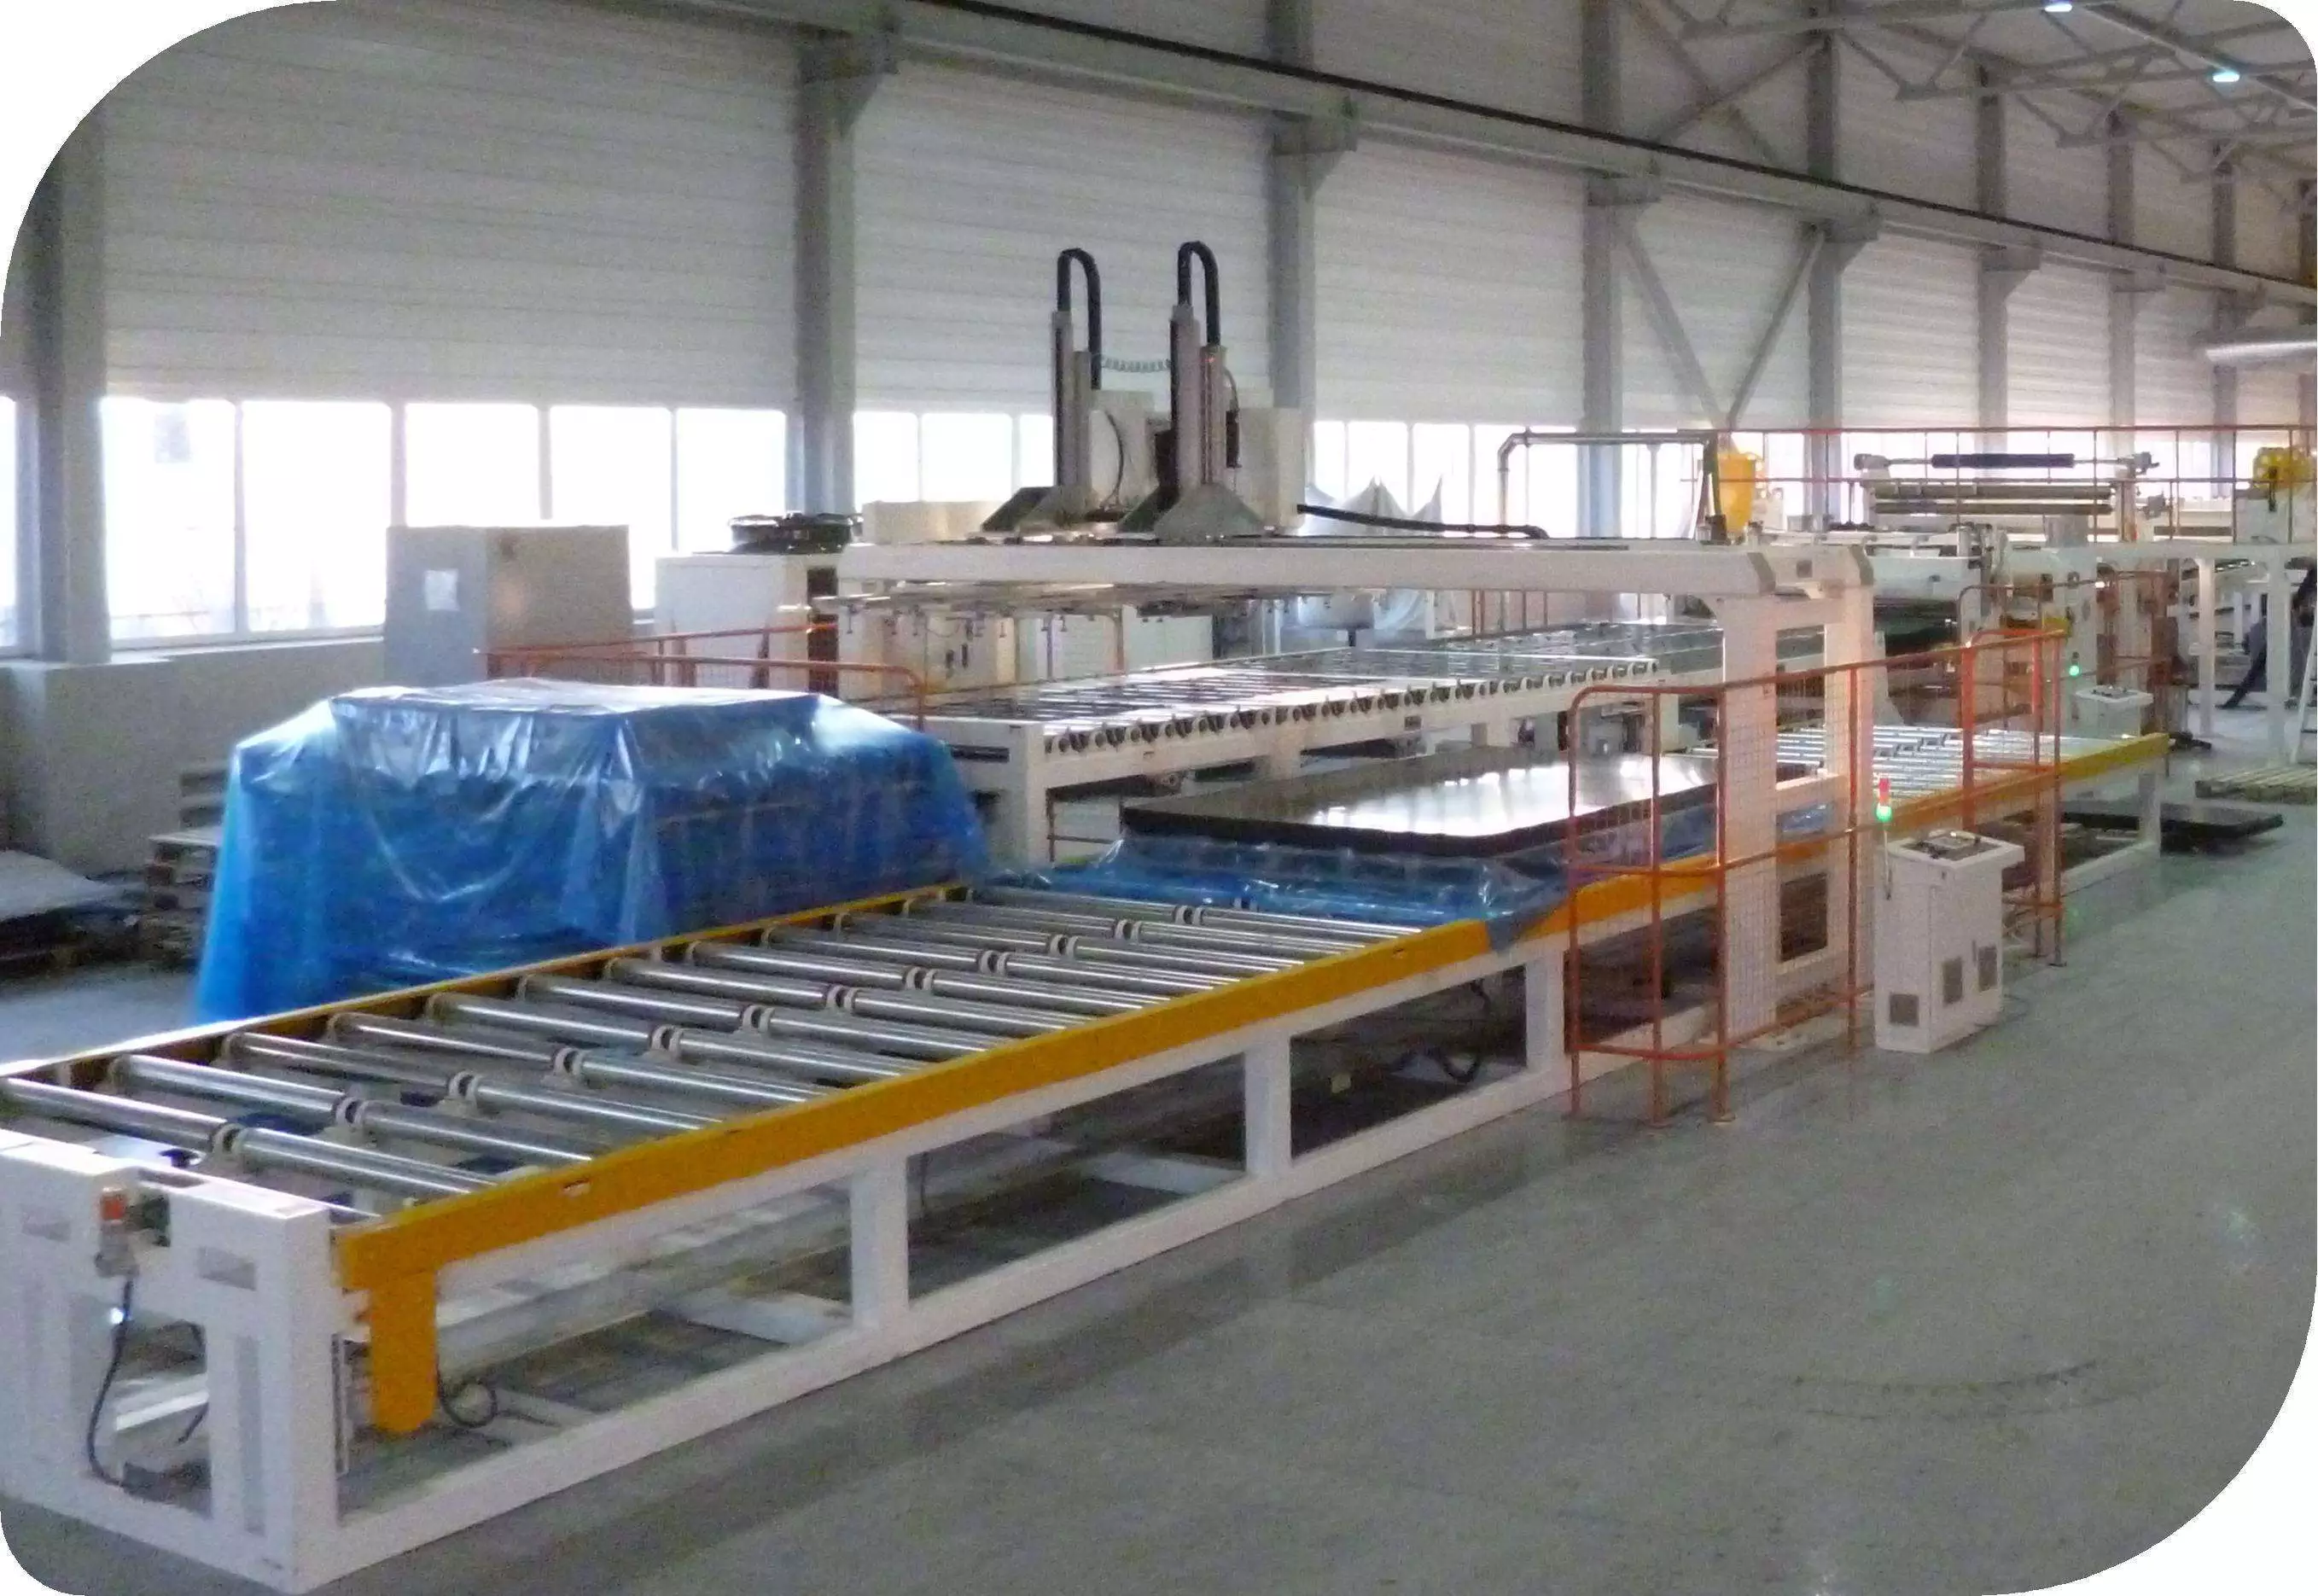 2013 год - Commissioning of new extrusion shop No. 3. The Company purchased a new extrusion line for the manufacture of polypropylene and polyethylene sheets. в АО Сосновскагропромтехника